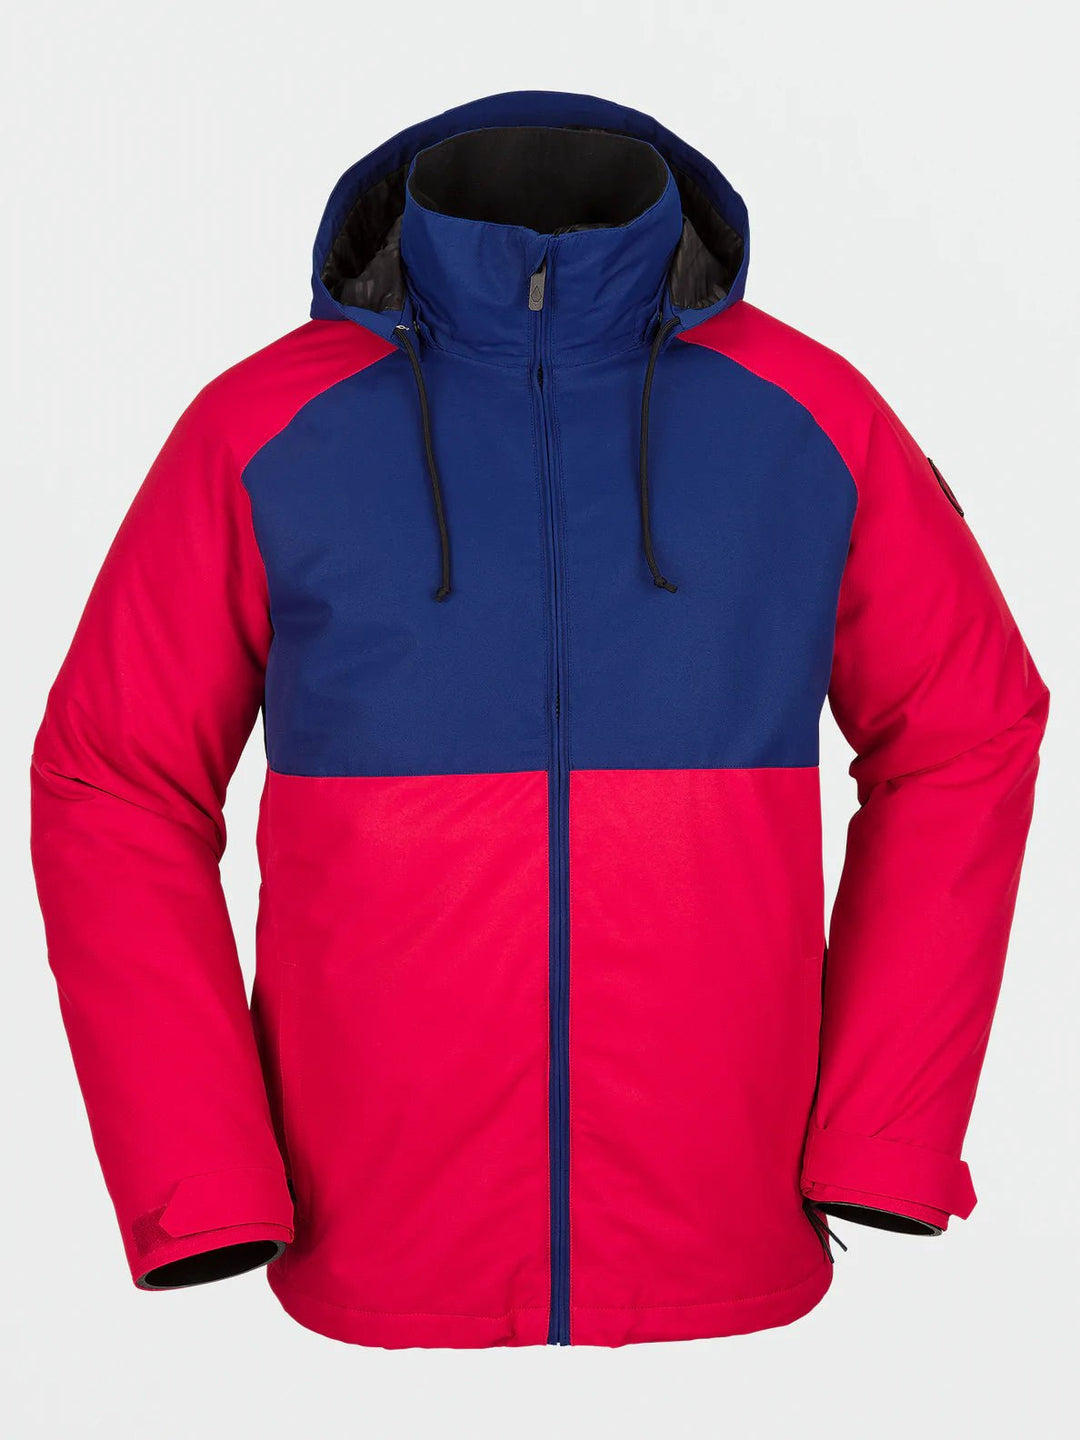 Boone Mountain Sports - M 2836 INS JACKET